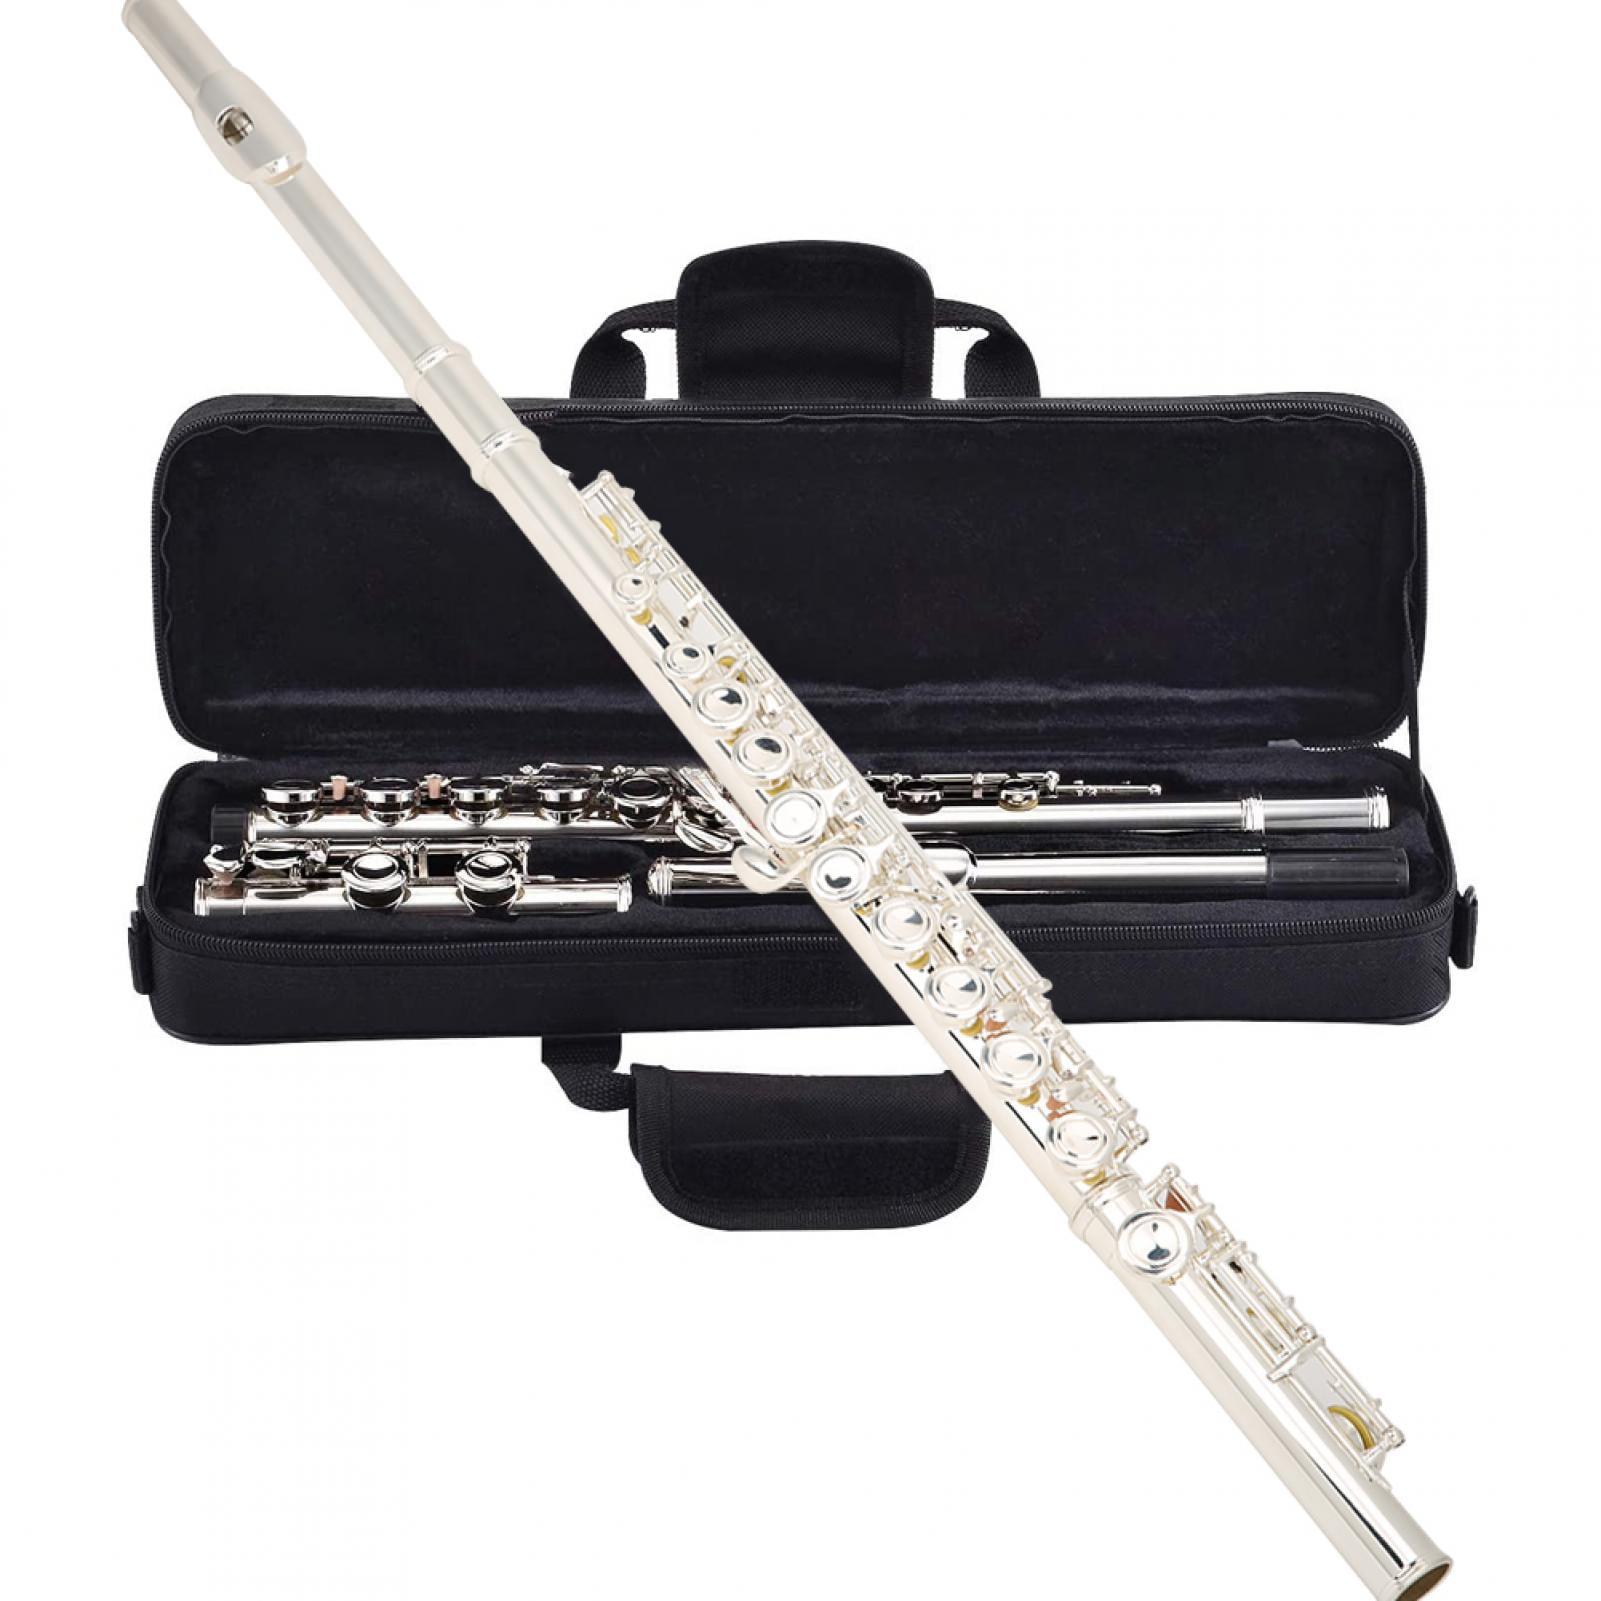 Flatsons Flute Closed Hole 16 Key C Key Silver Plated Suitcase Beginners Wind Instrument Flute 